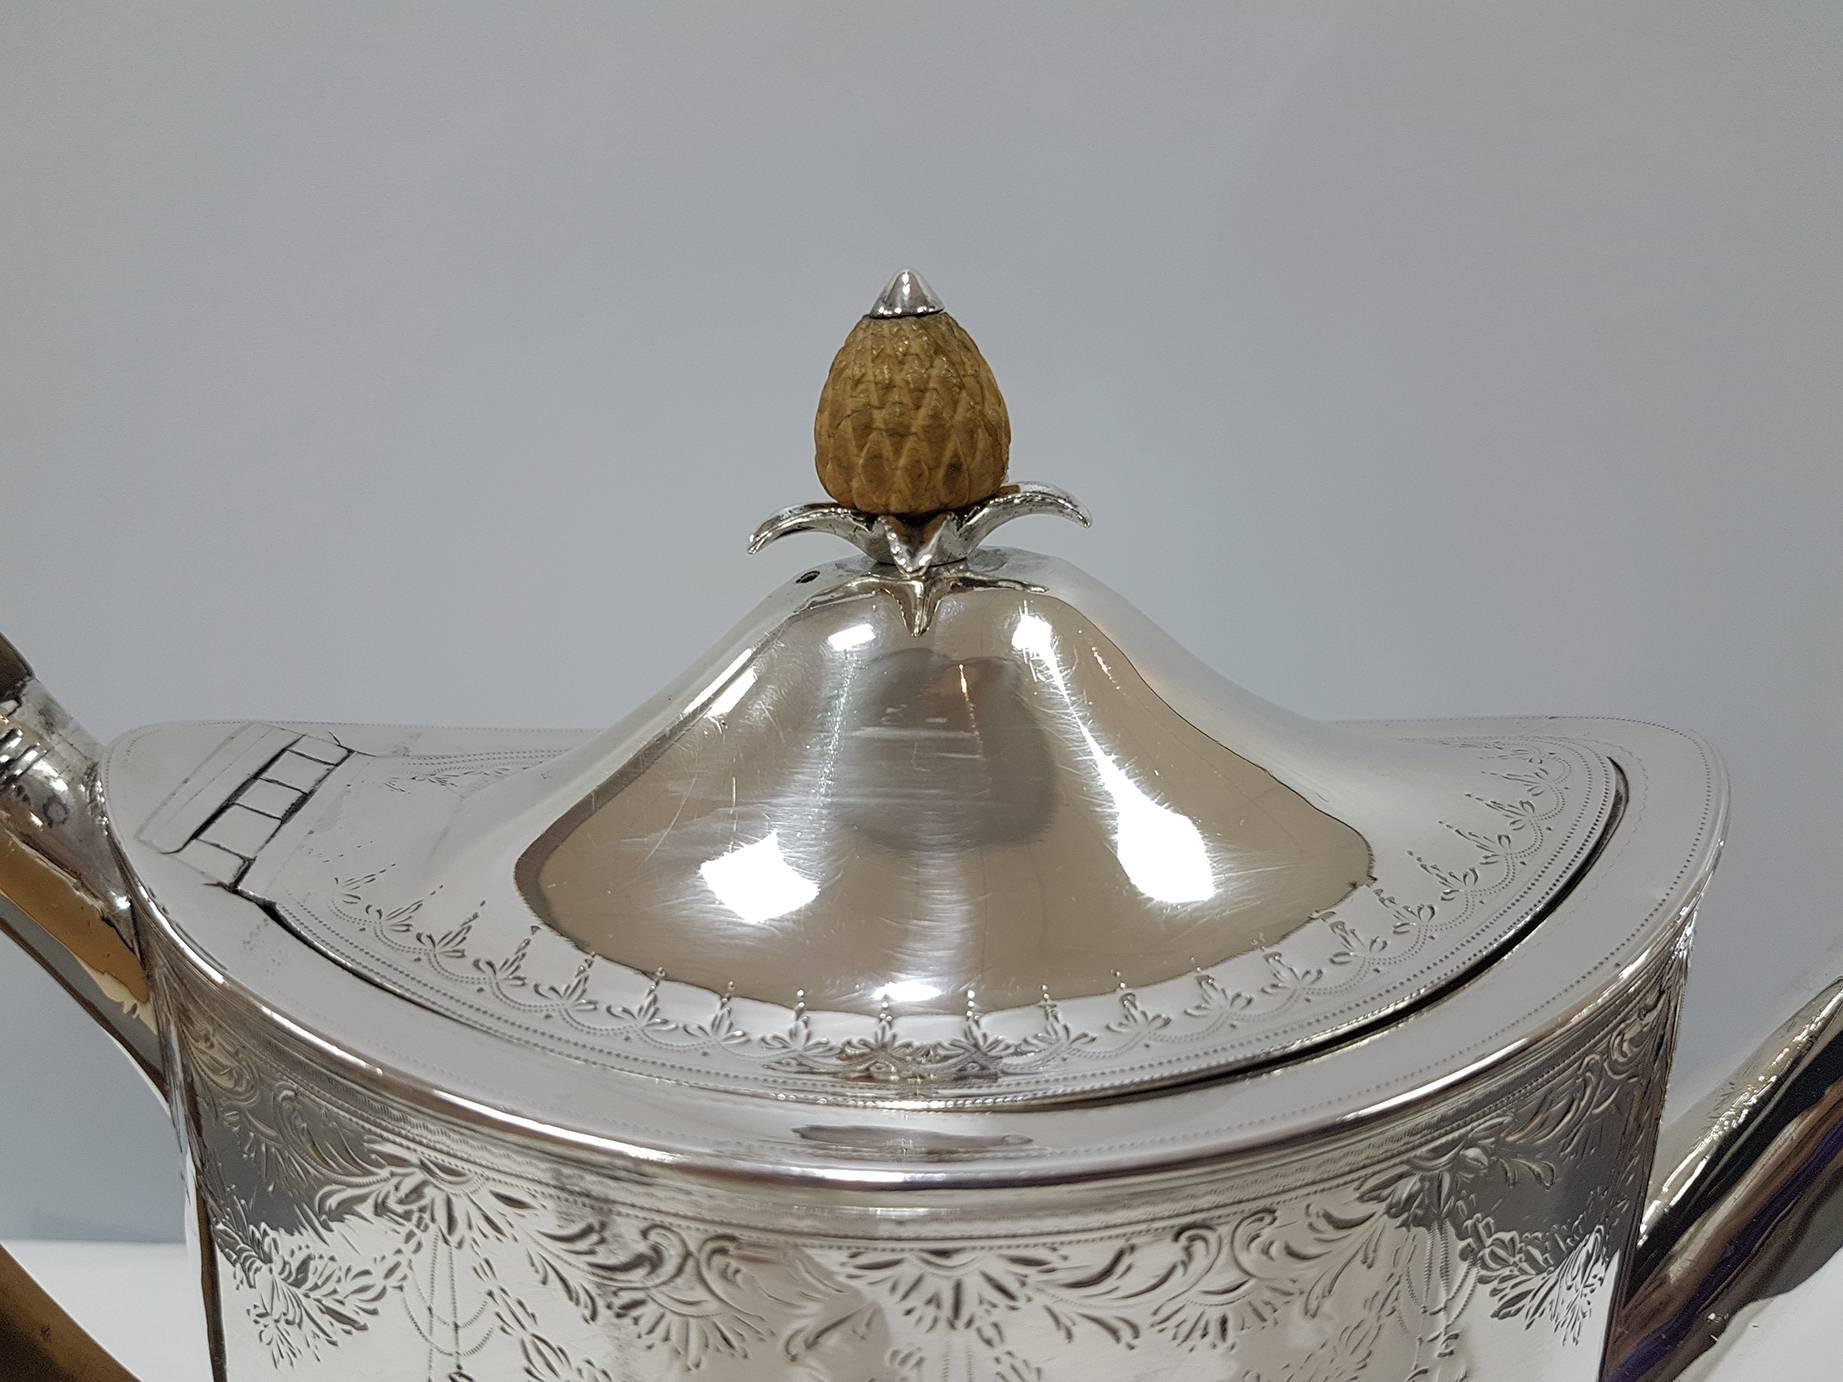 Antique Georgian sterling silver teapot on Stand, having a hand-engraved oval body, a hinged domed lid with wooden finial, a wooden scroll handle, and sitting on its original stand with four flanged feet. Made by Peter and Ann Bateman of London in